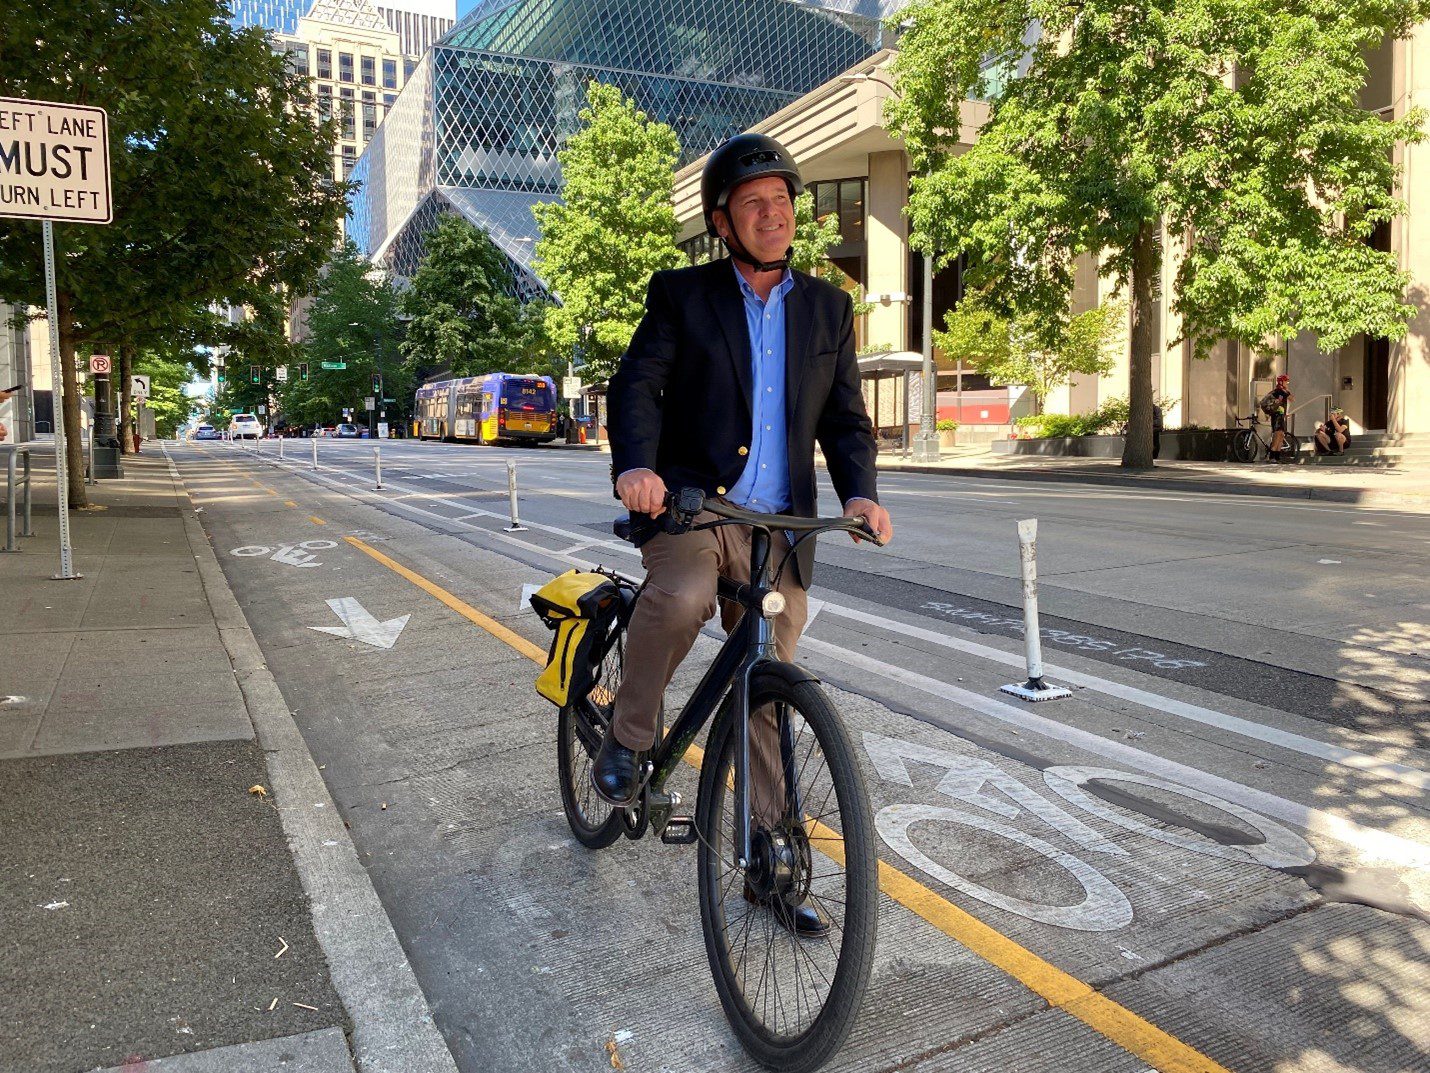 Greg Spotts bikes down the 4th Ave Protected Bike Lane in downtown Seattle on a sunny day. The Seattle Central Library and a King County Metro bus are in the background, as well as several large trees.